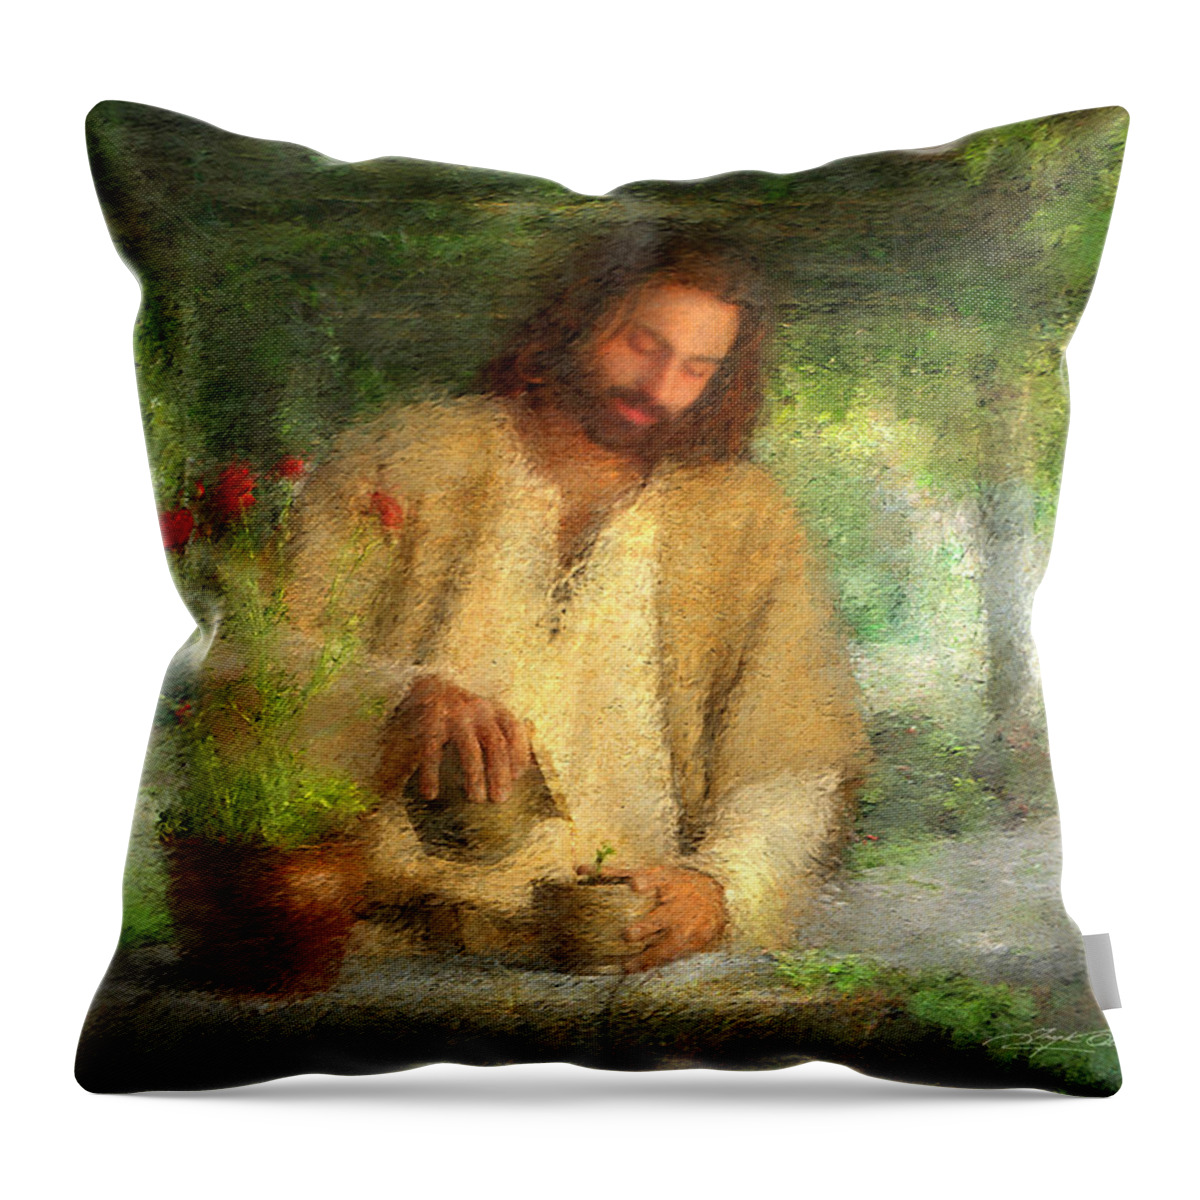 Jesus Throw Pillow featuring the painting Nurtured by the Word by Greg Olsen